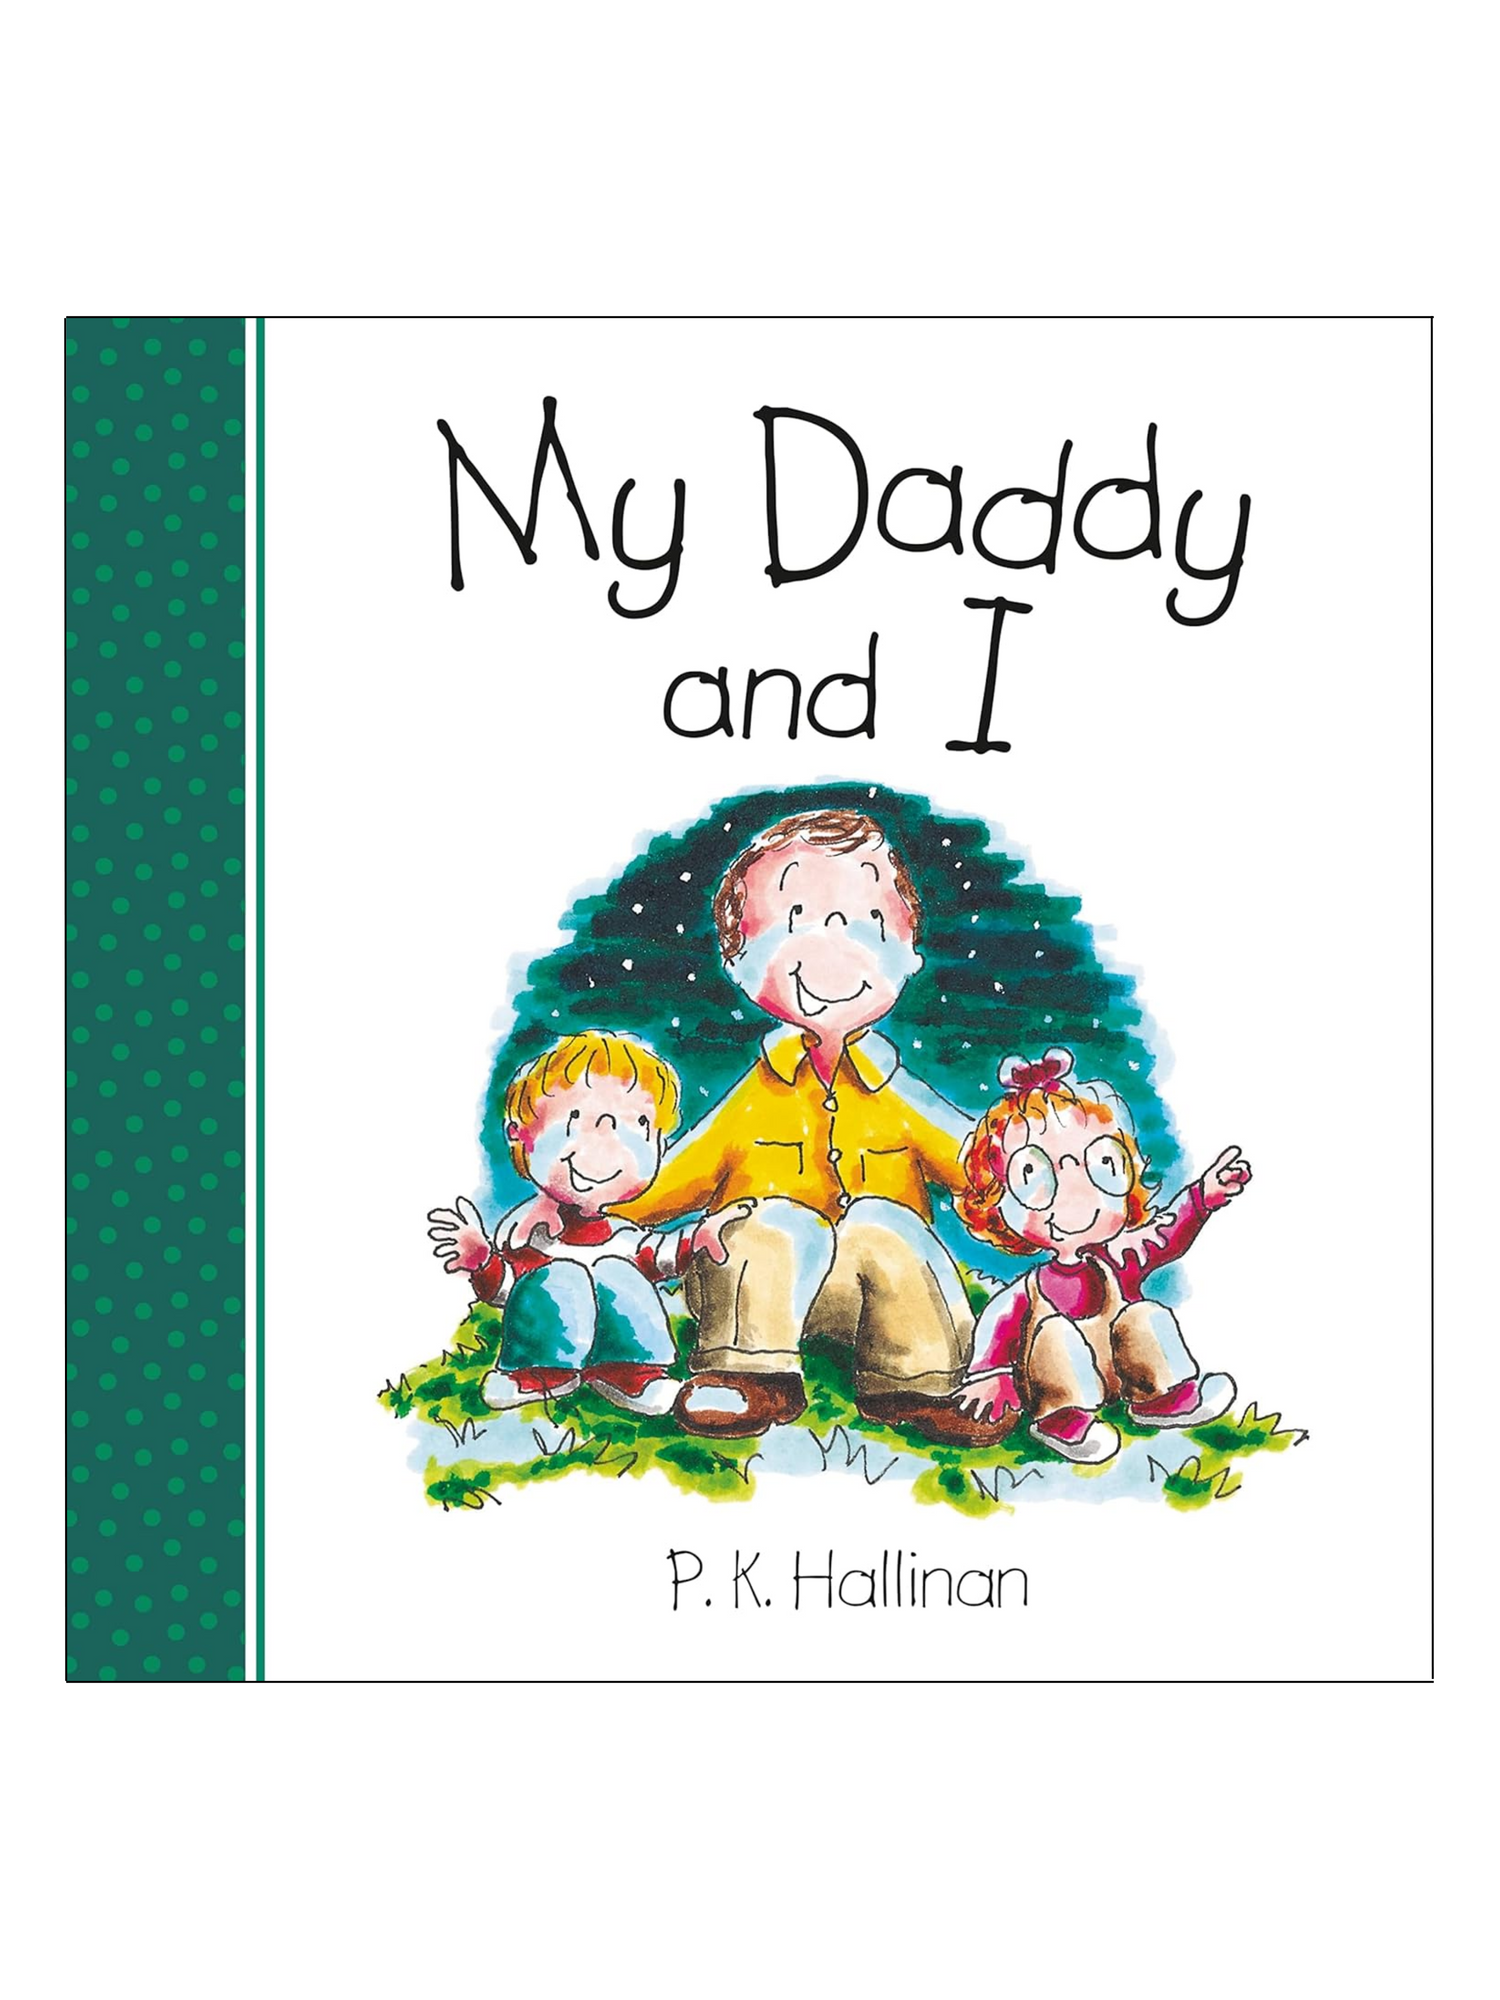 MY DADDY AND I CHILDREN'S BOOK - THE LITTLE EAGLE BOUTIQUE